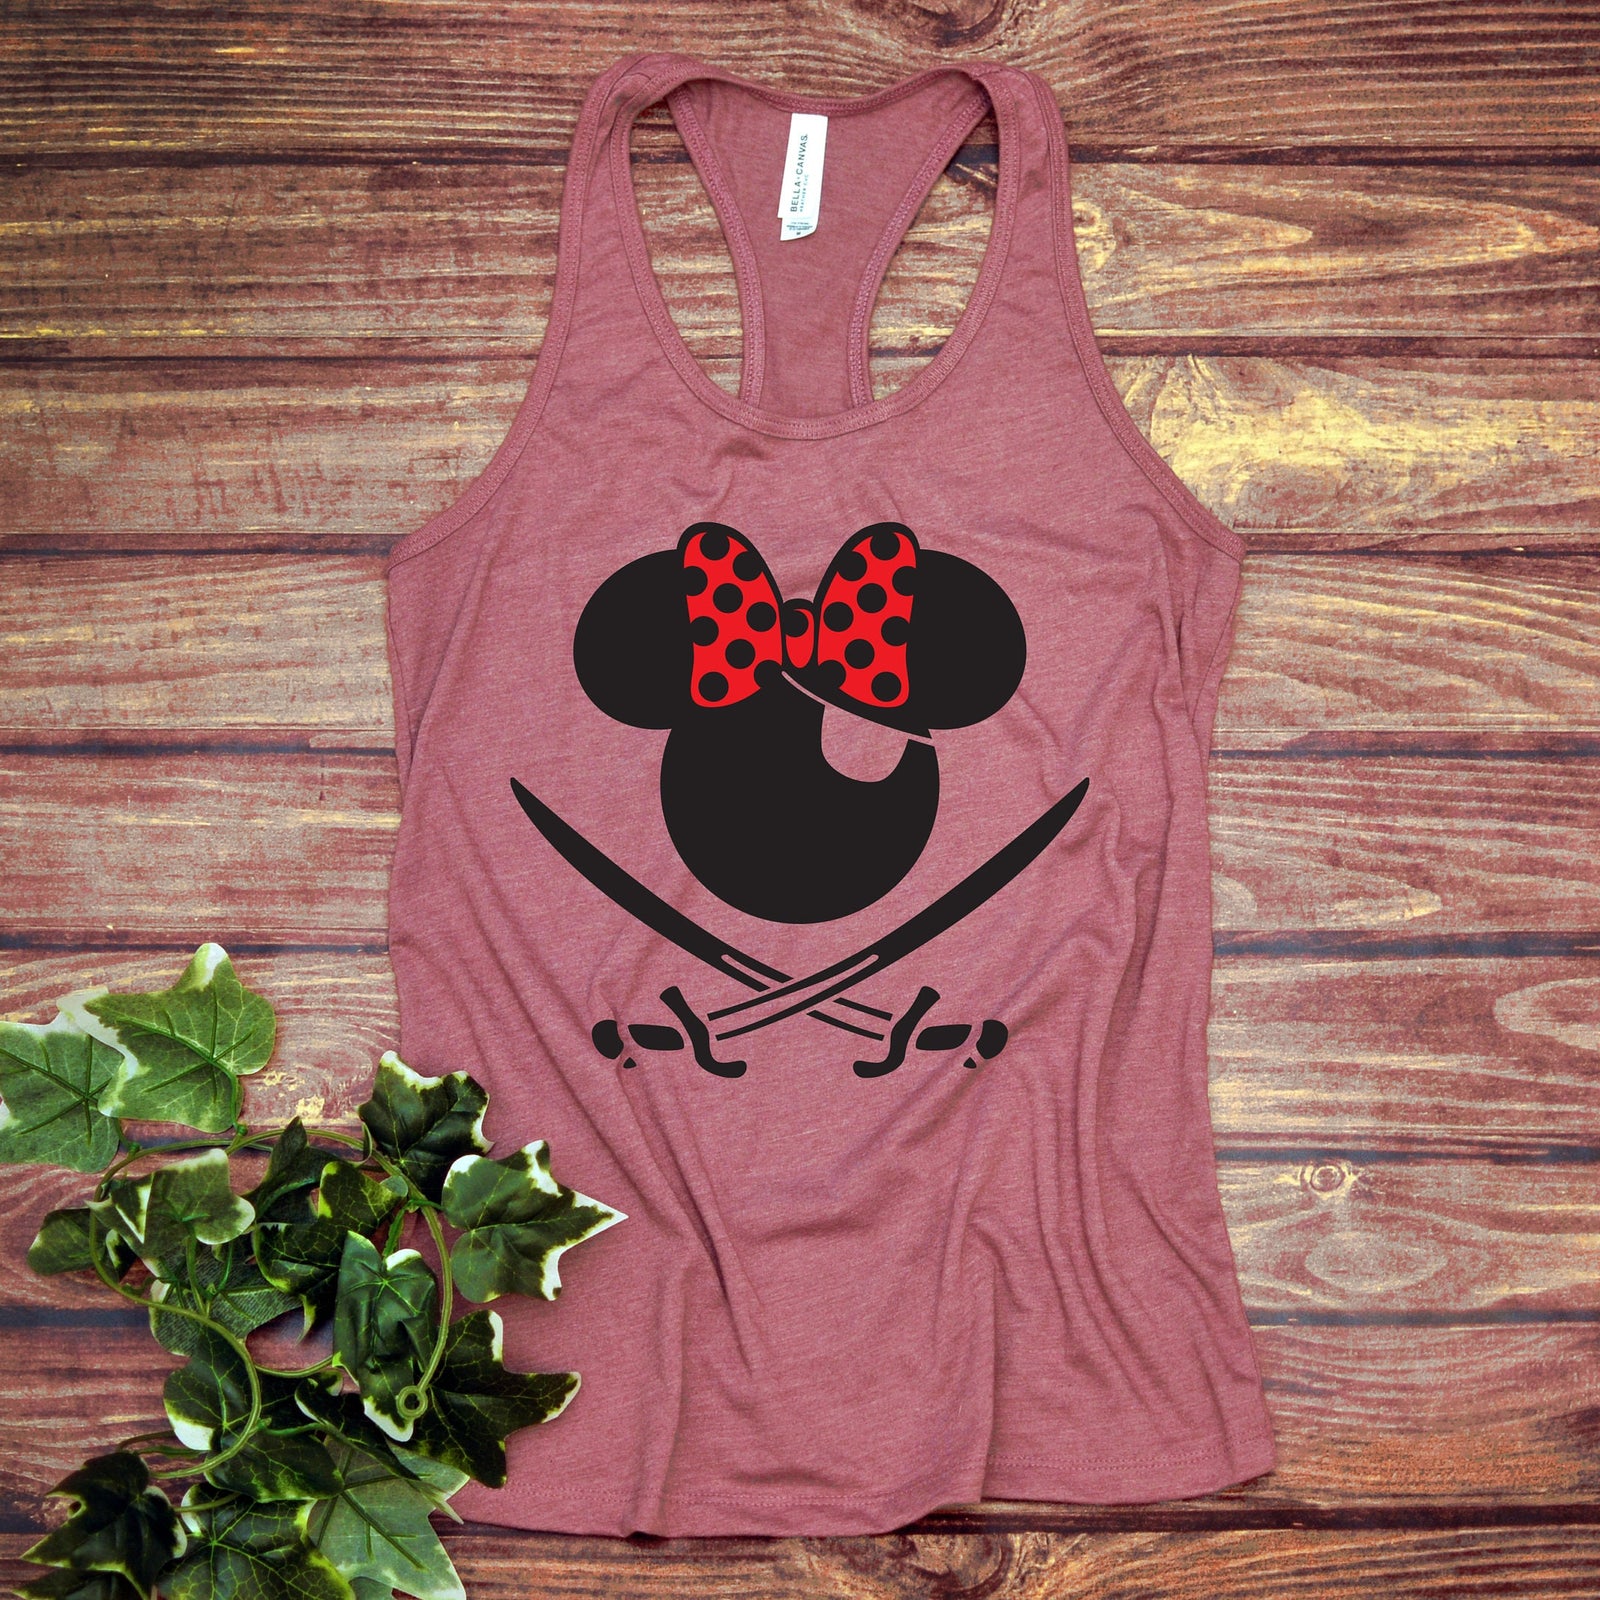 Pirate Minnie Mouse Adult Racer back Tank Top- Drinks - Disney Cruise - Caribbean